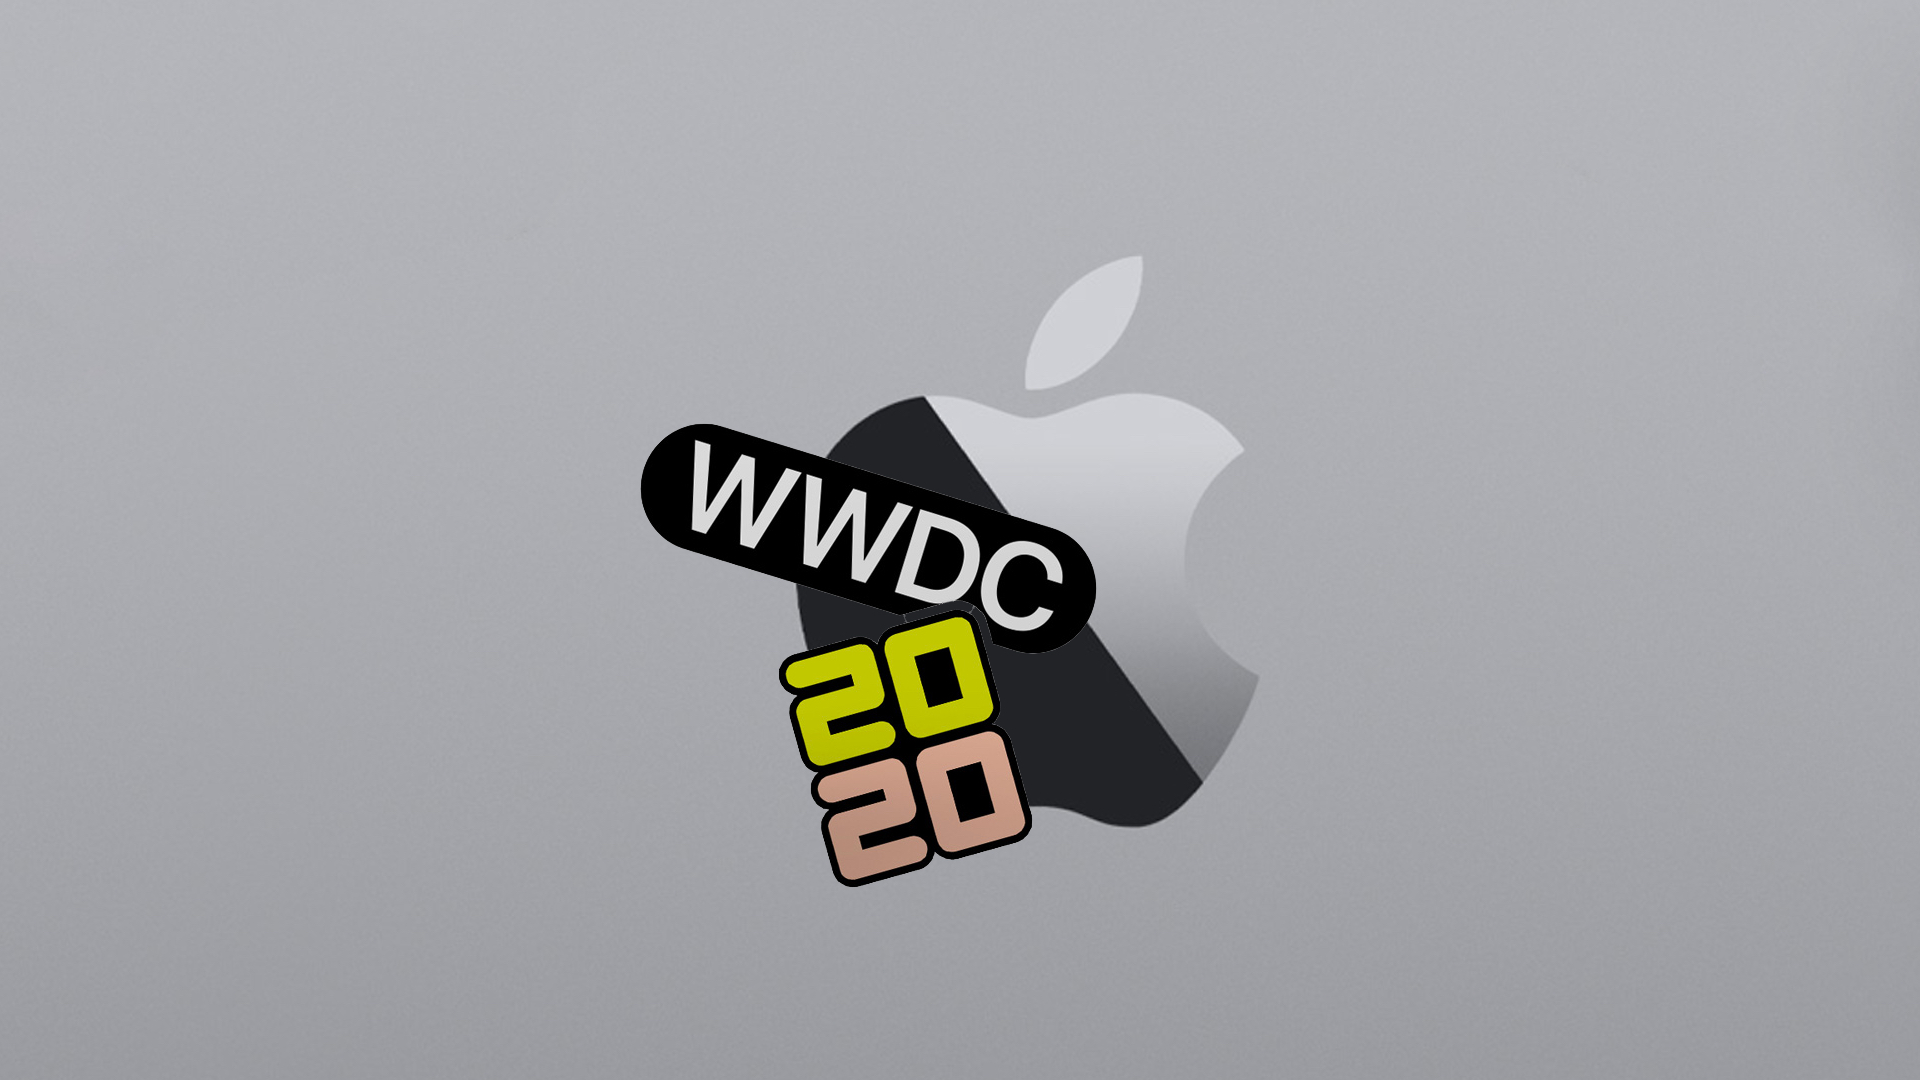 Apple’s Worldwide Developers Conference 2020 goes online-only